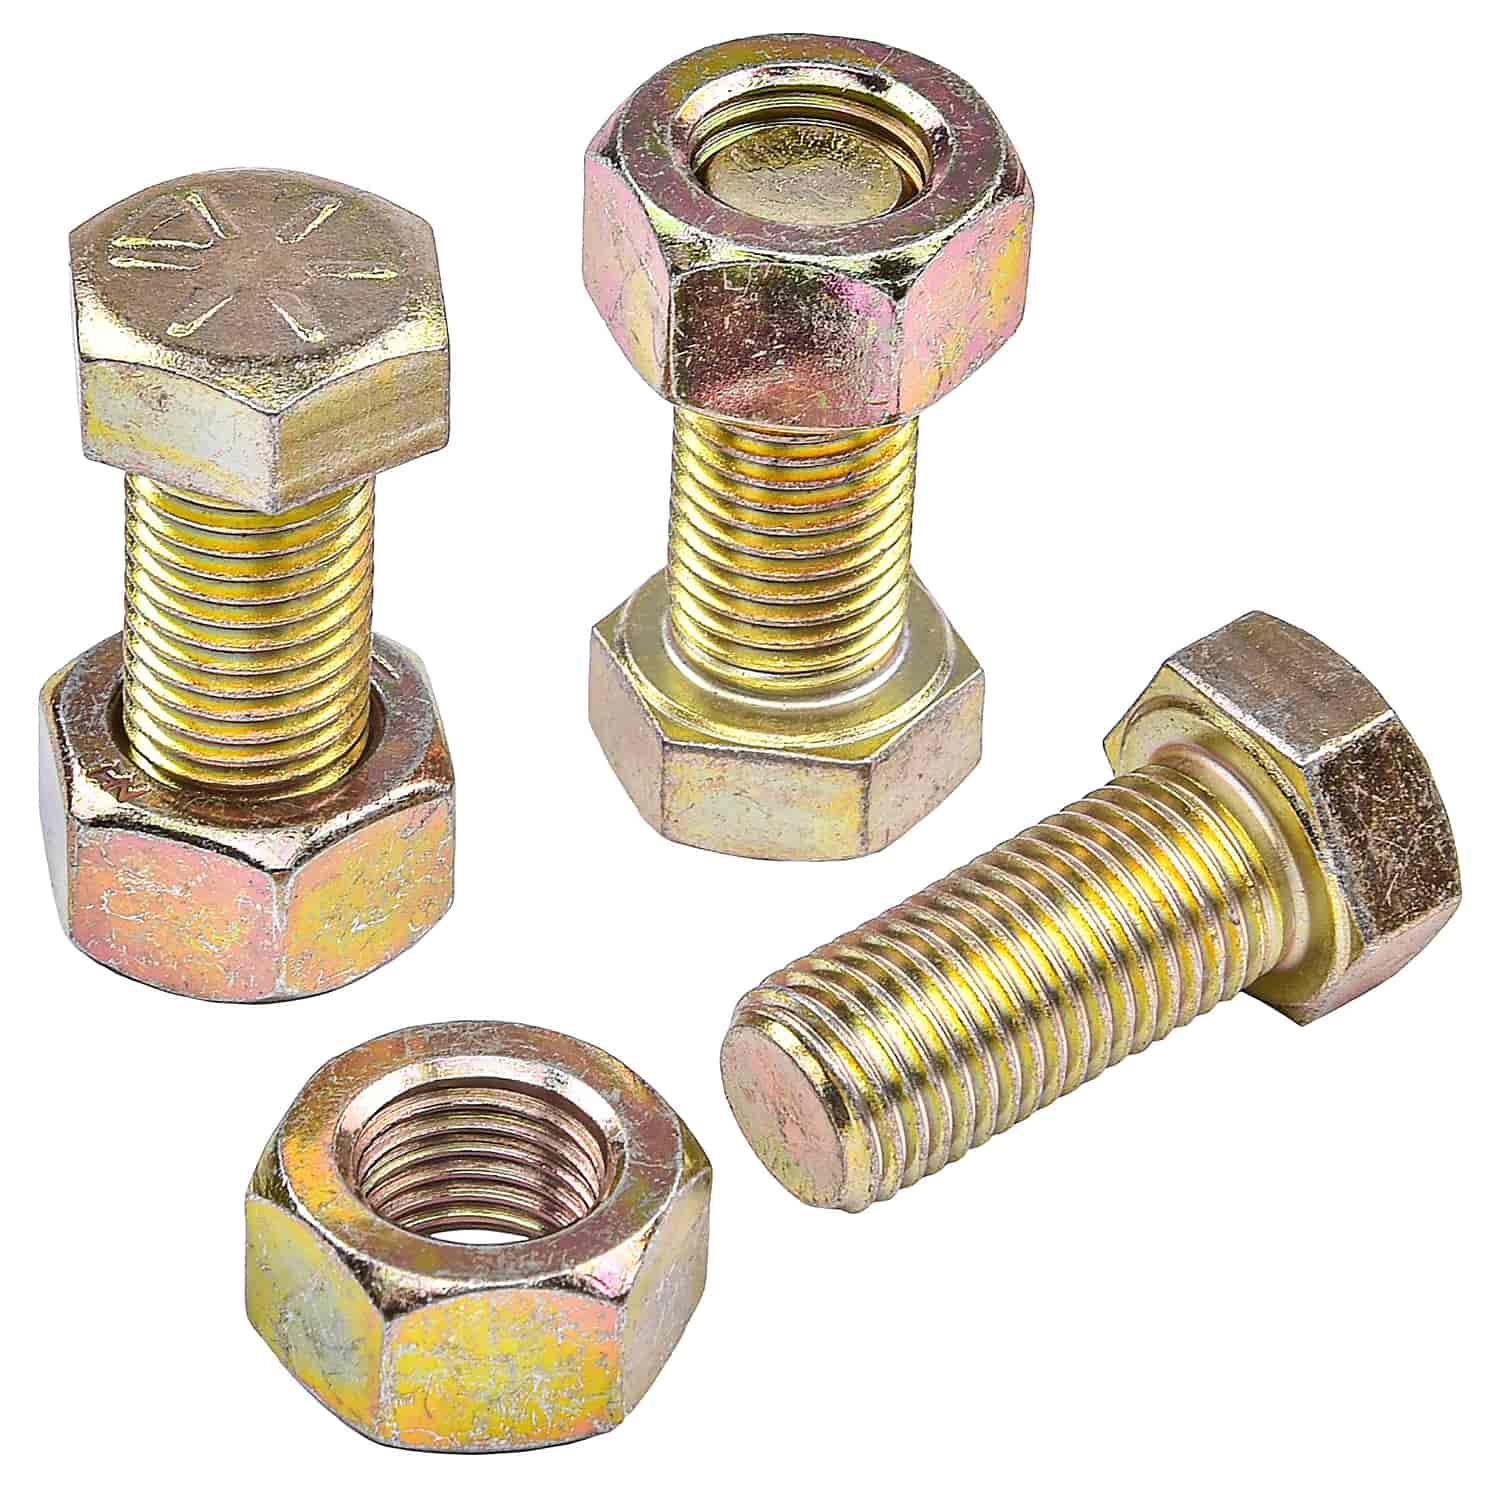 Torque Converter Bolts For 8 in. Diameter Race Converters [7/16 in.-20 x 1 in. UHL]